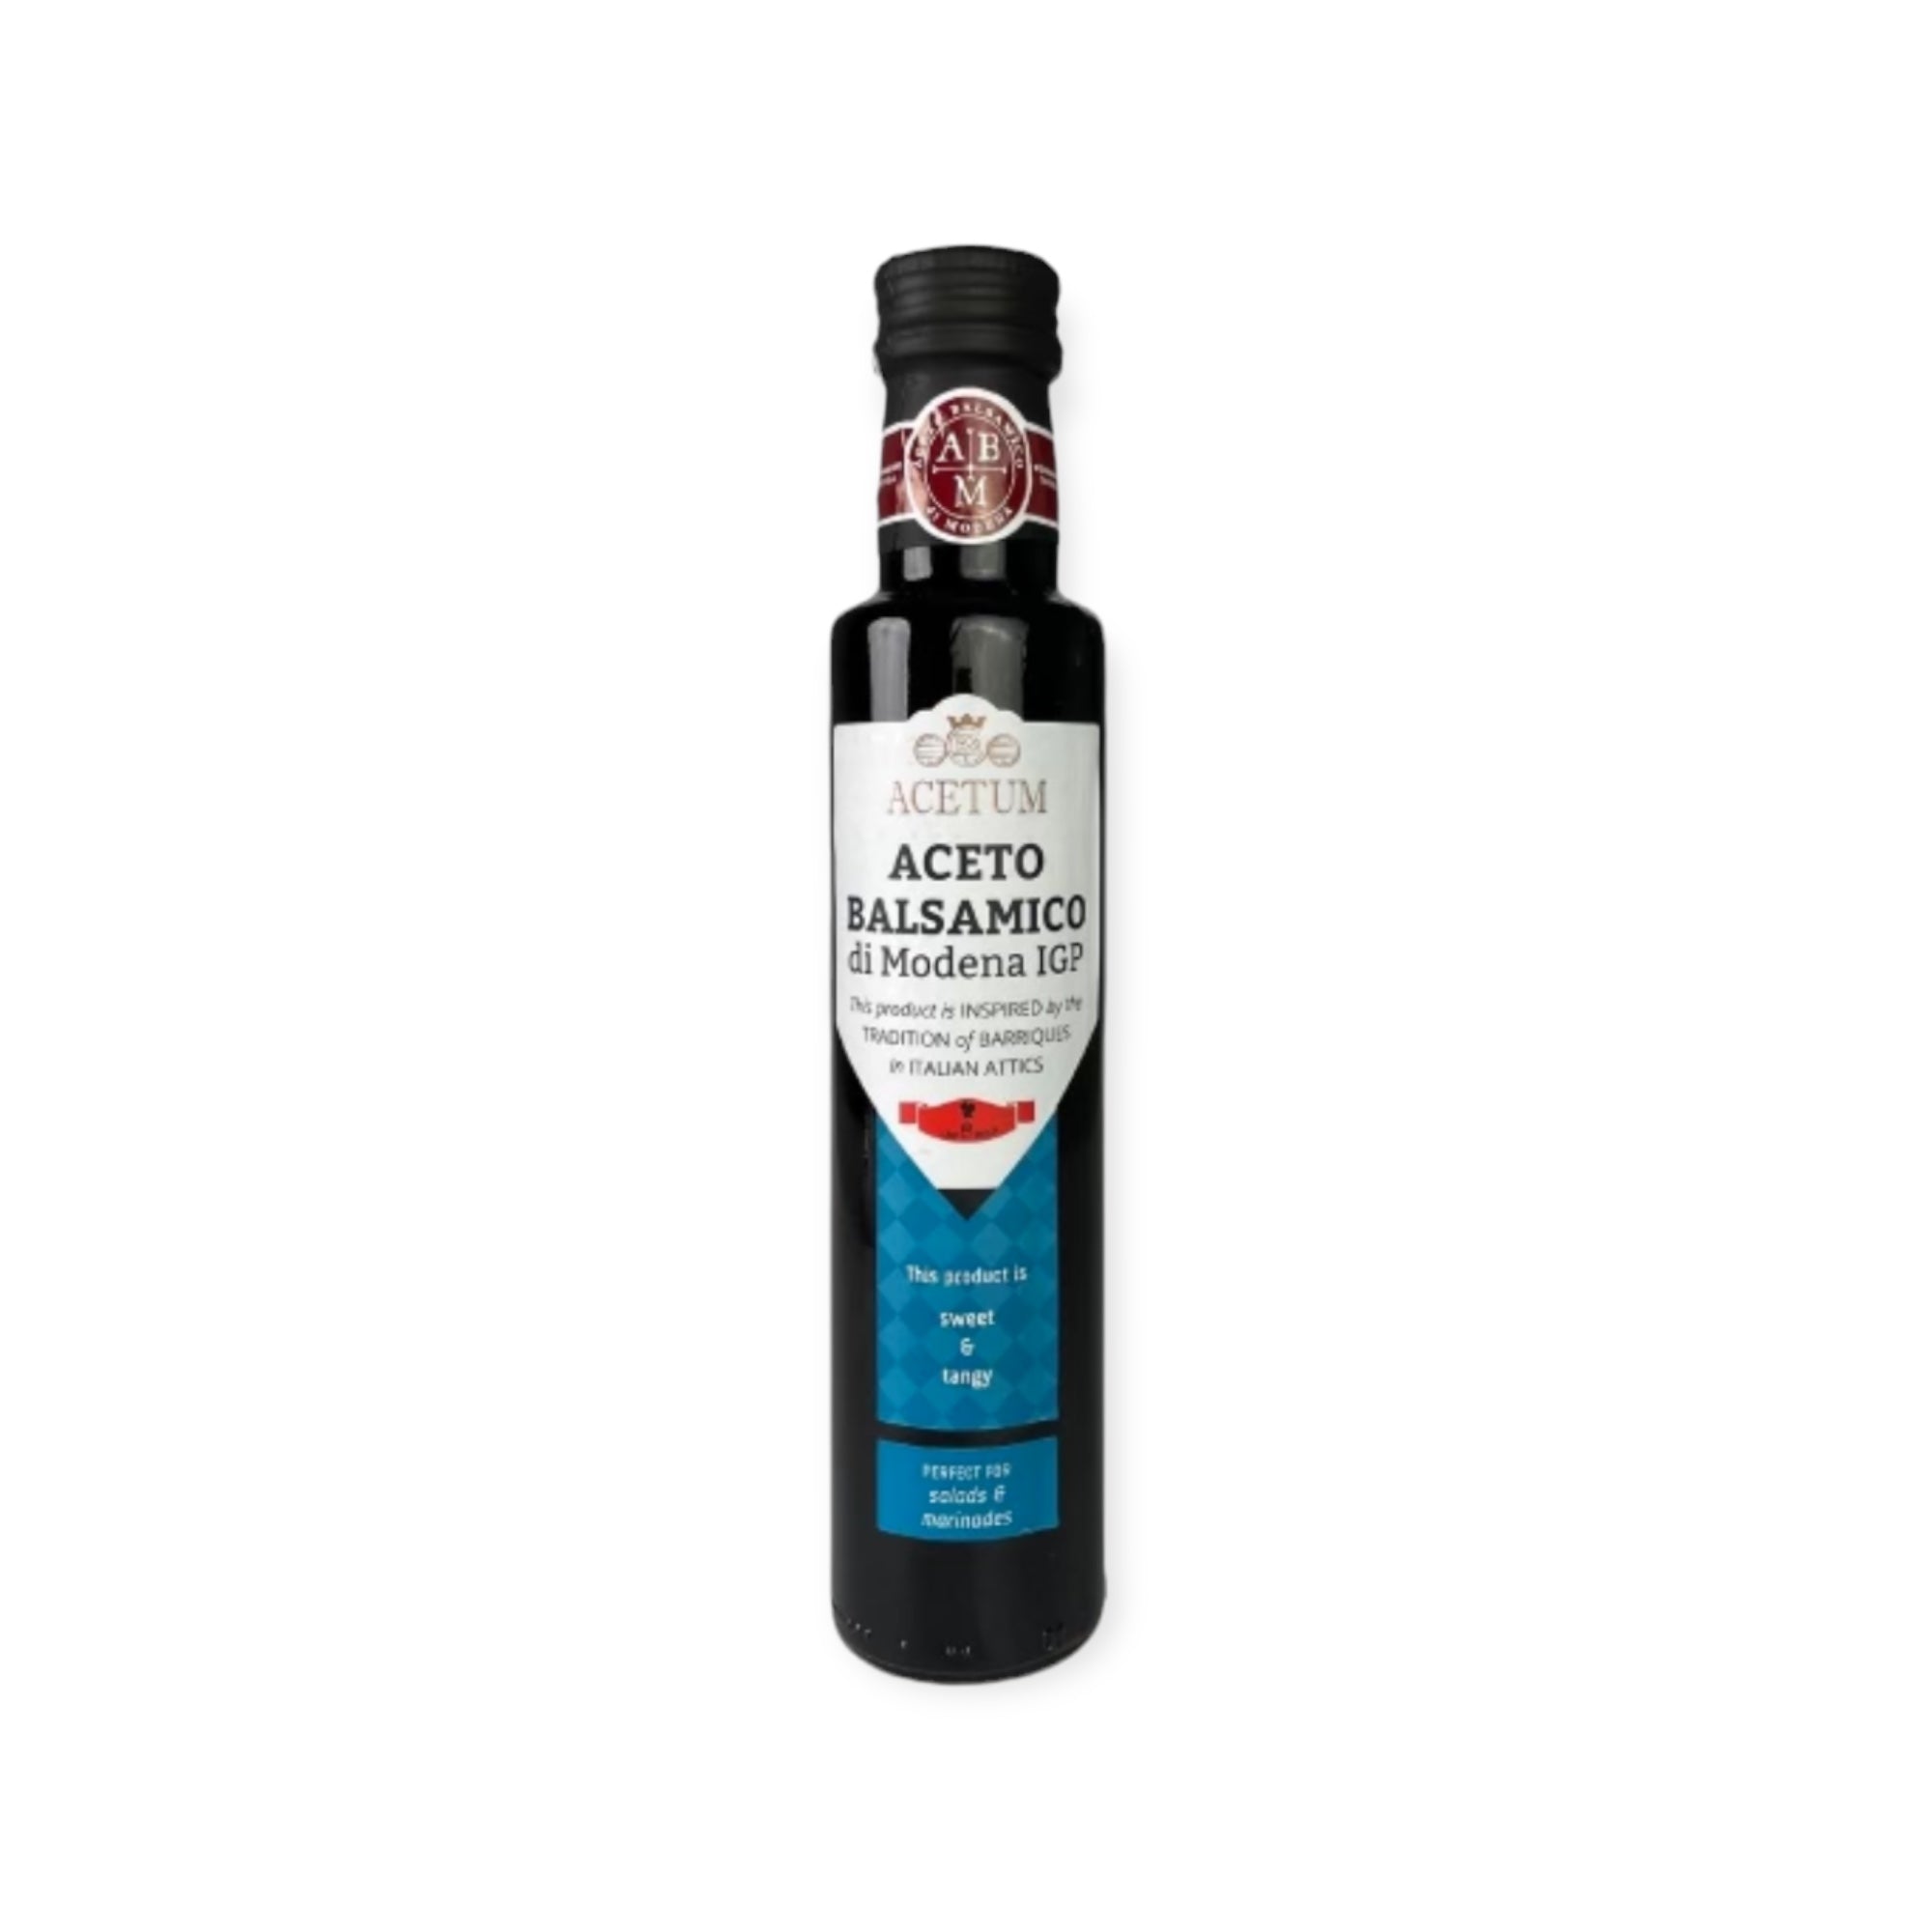 Balsamic Vinegar From Modena IGP By Acetum